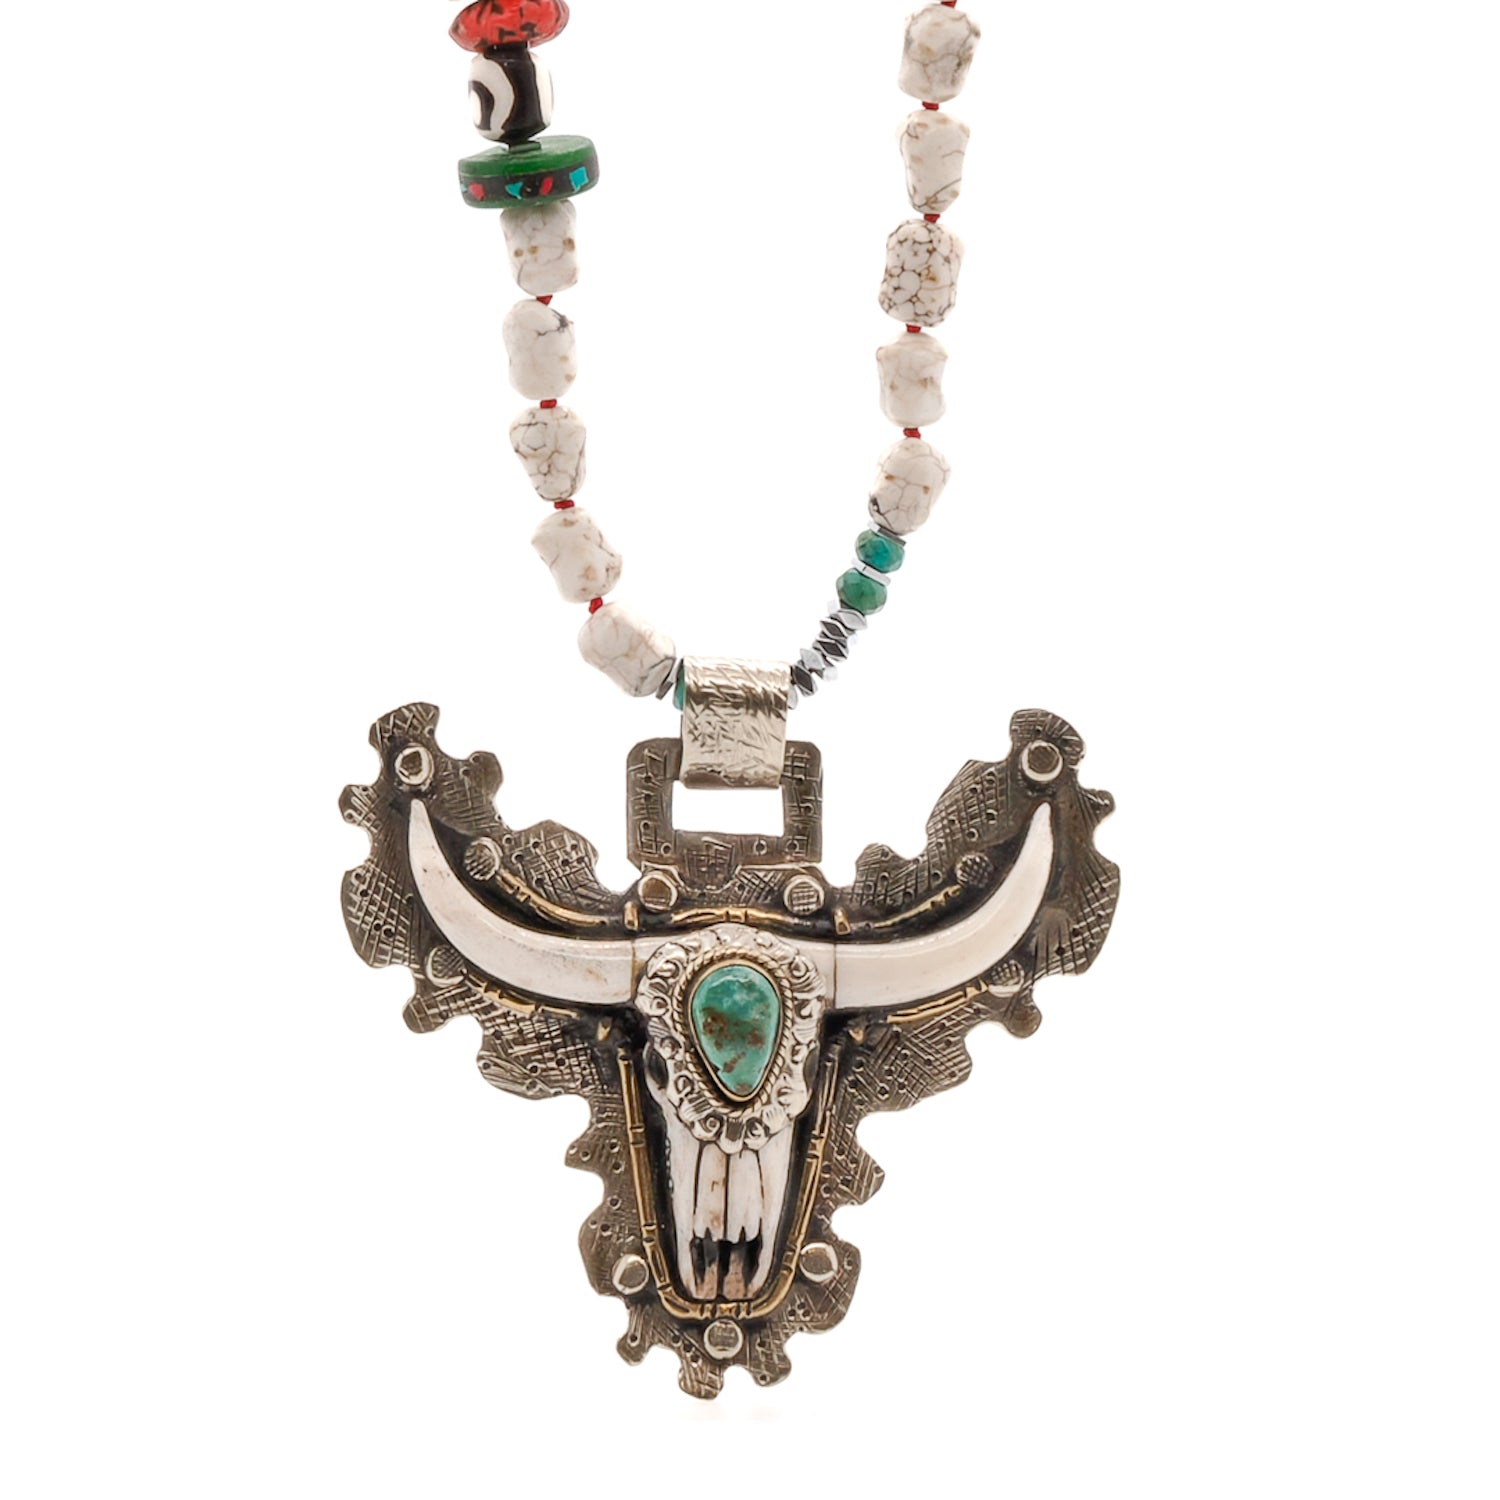 The Mystic Longhorn Unique Necklace, featuring the stunning handmade carved longhorn pendant and a combination of Tibetan, African, and Agate beads, radiating boldness and spiritual elegance.